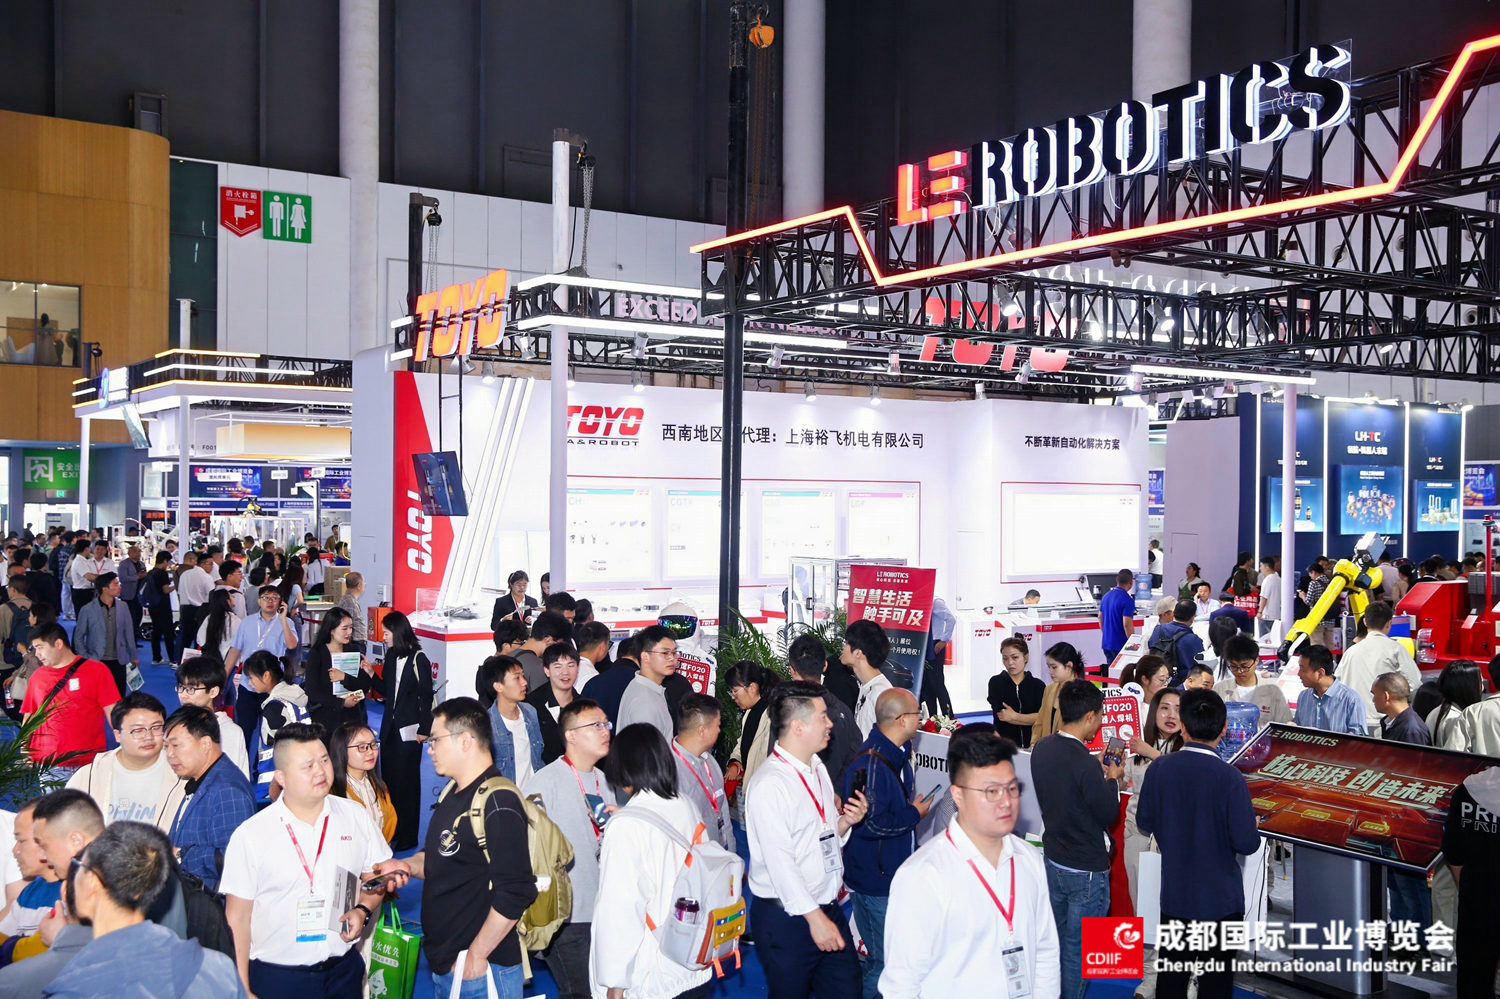 Chengdu Industrial Expo | LE Robotic Welder Empowers the Leap of New Quality Productive Forces, Leading Manufacturing Upgrade